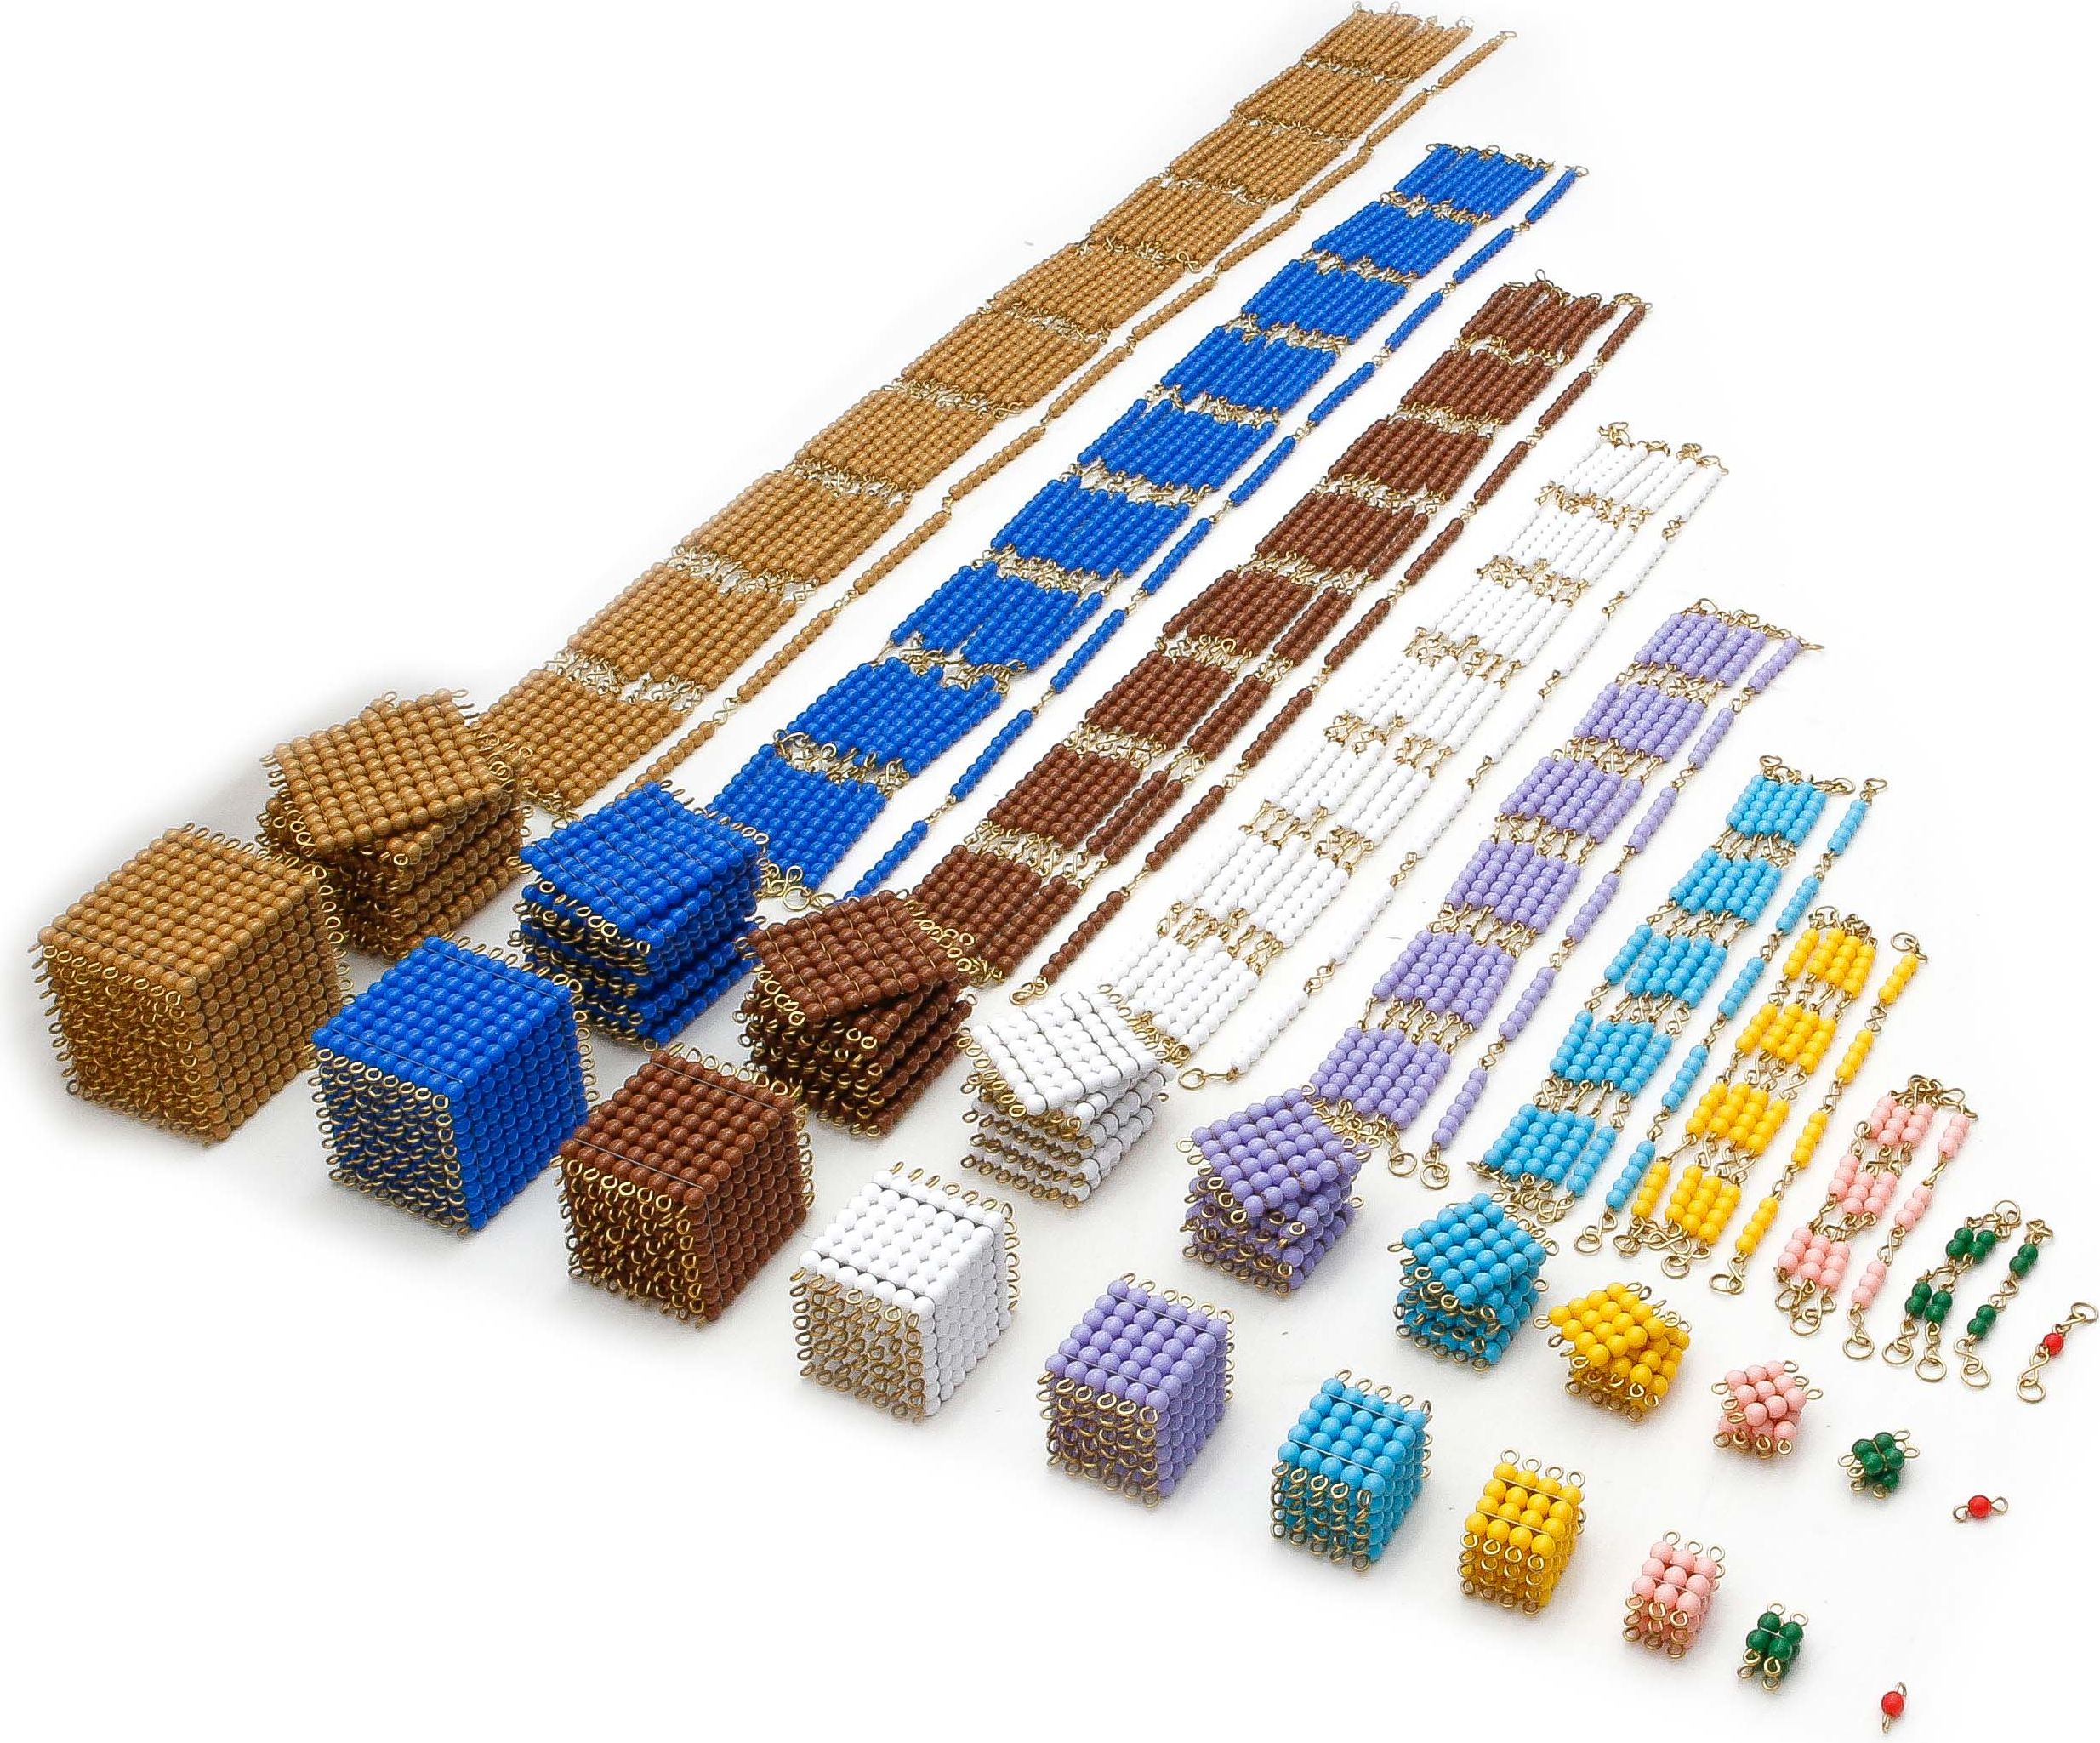 Bead Material: Cubes, Squares, Chains - obrázek 1